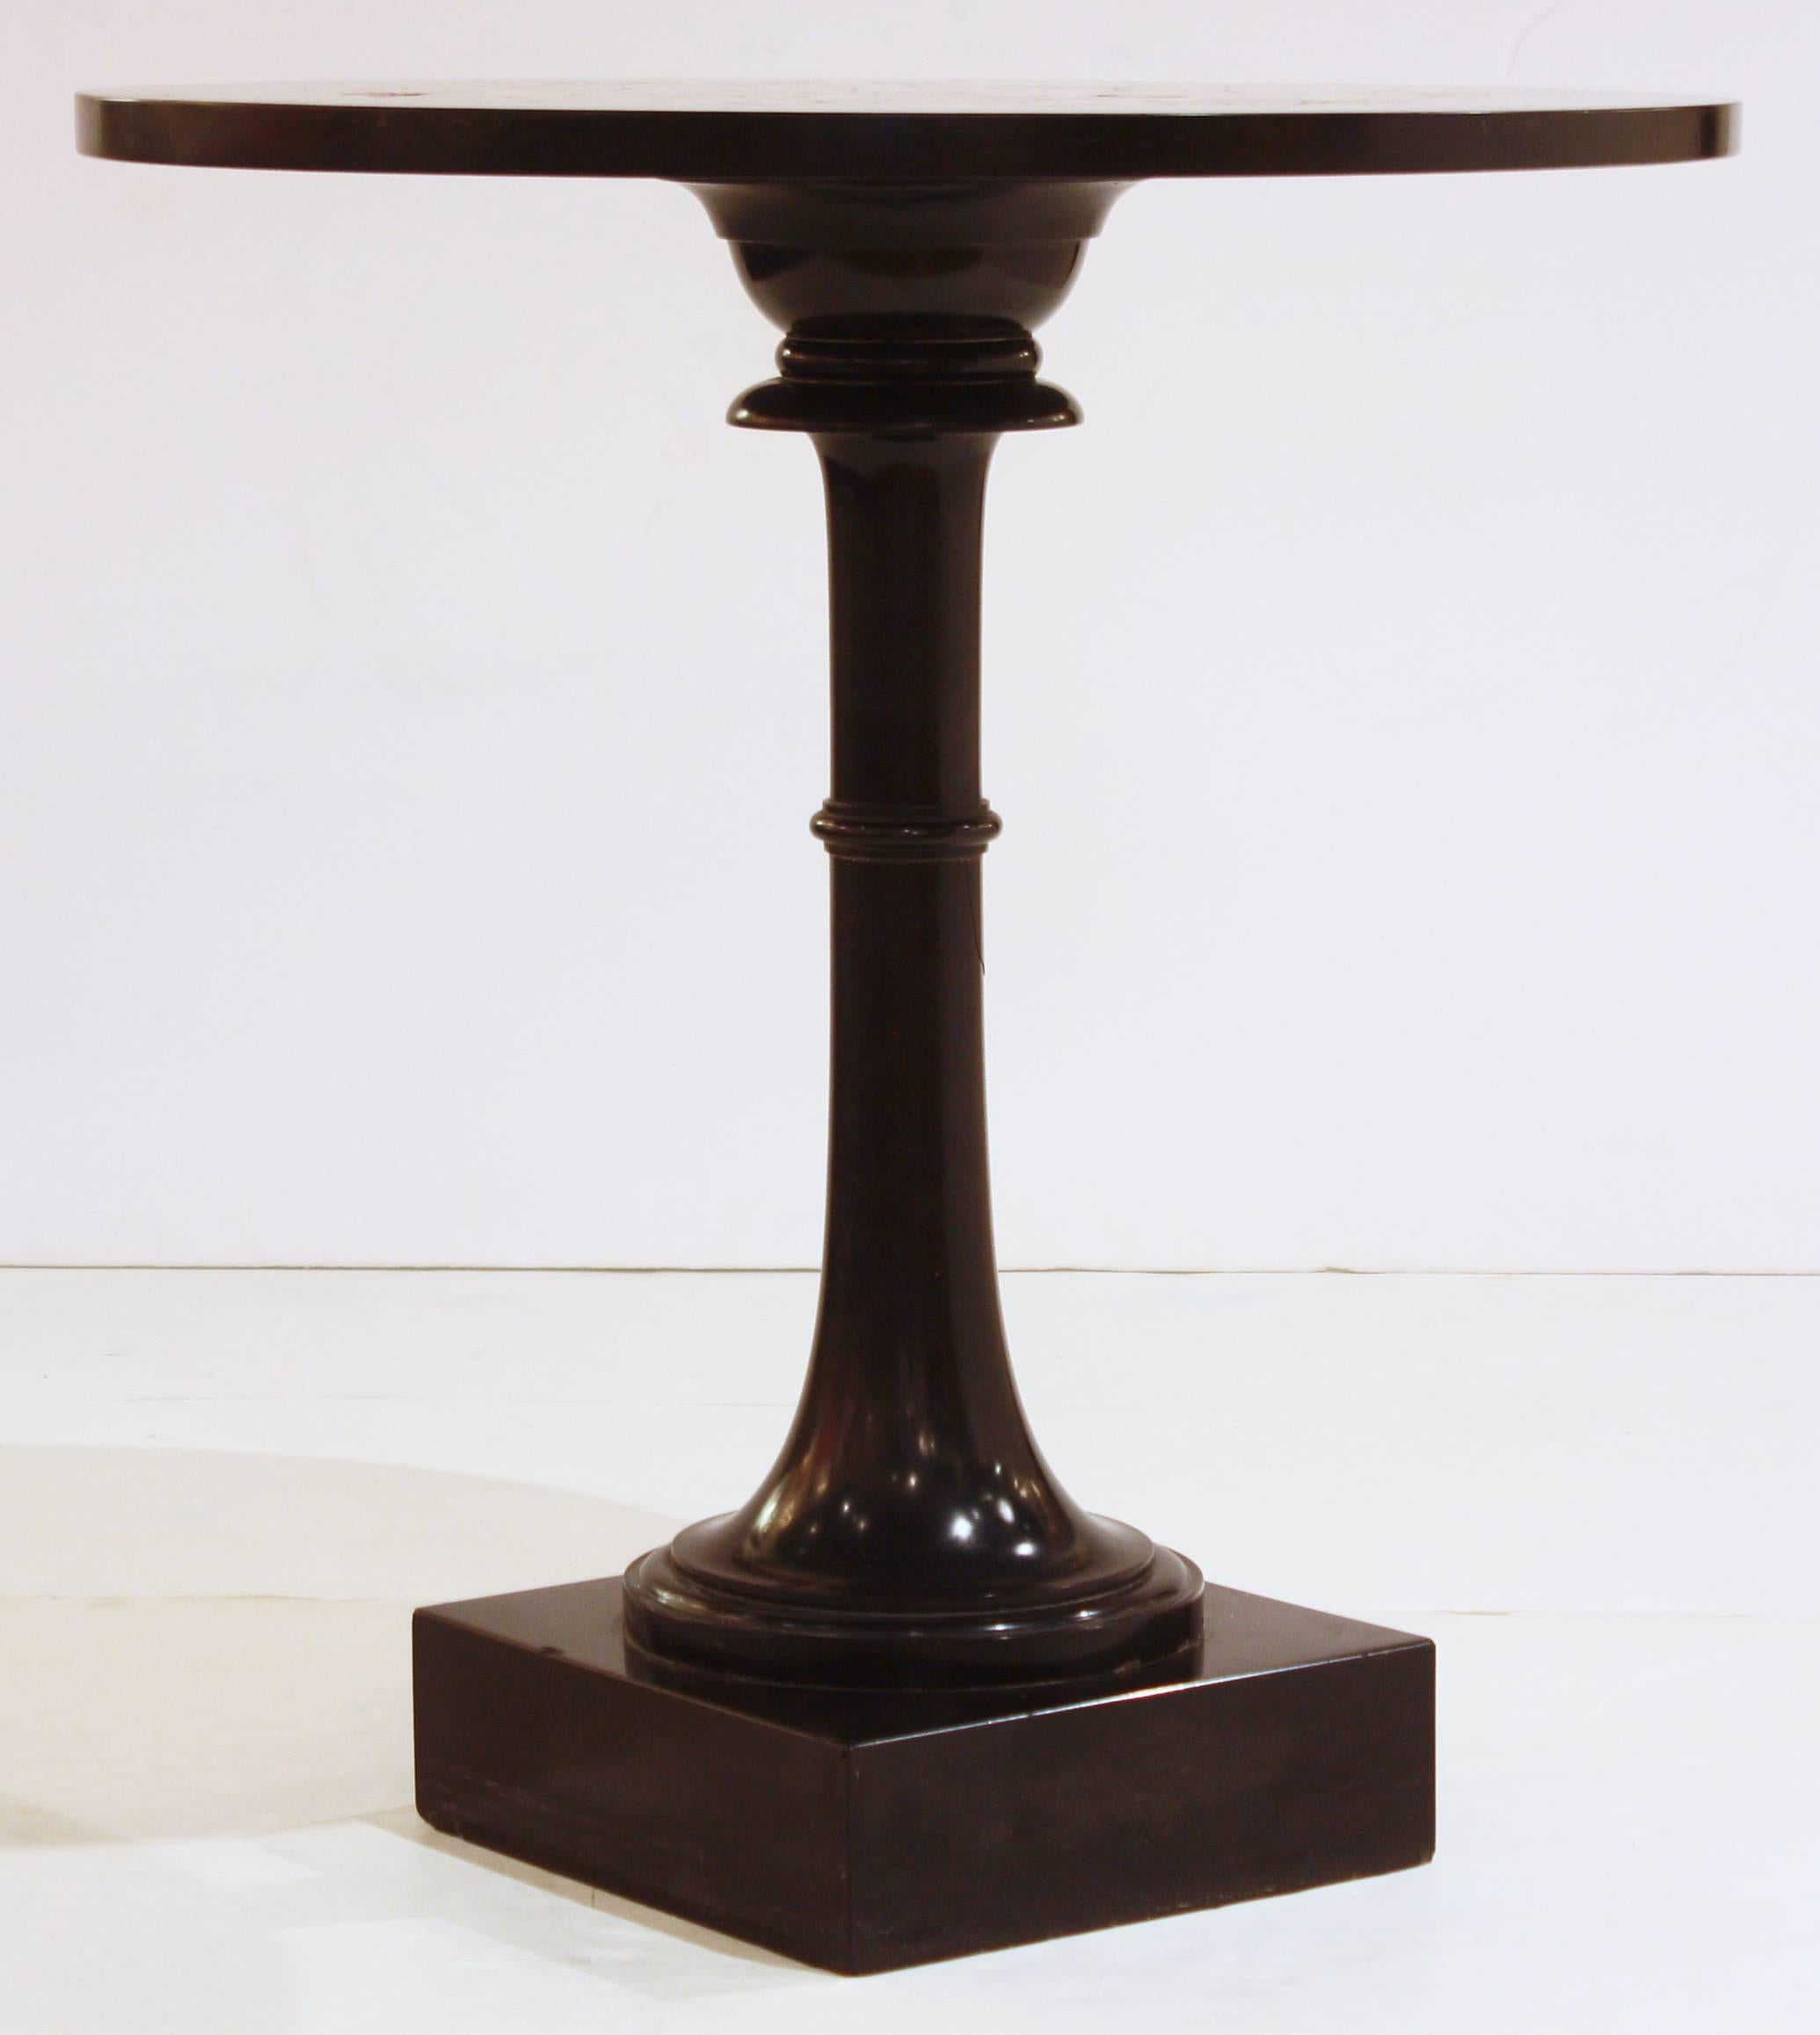 19th century table of Belgium black marble with specimen marble and hard stone inlaid top